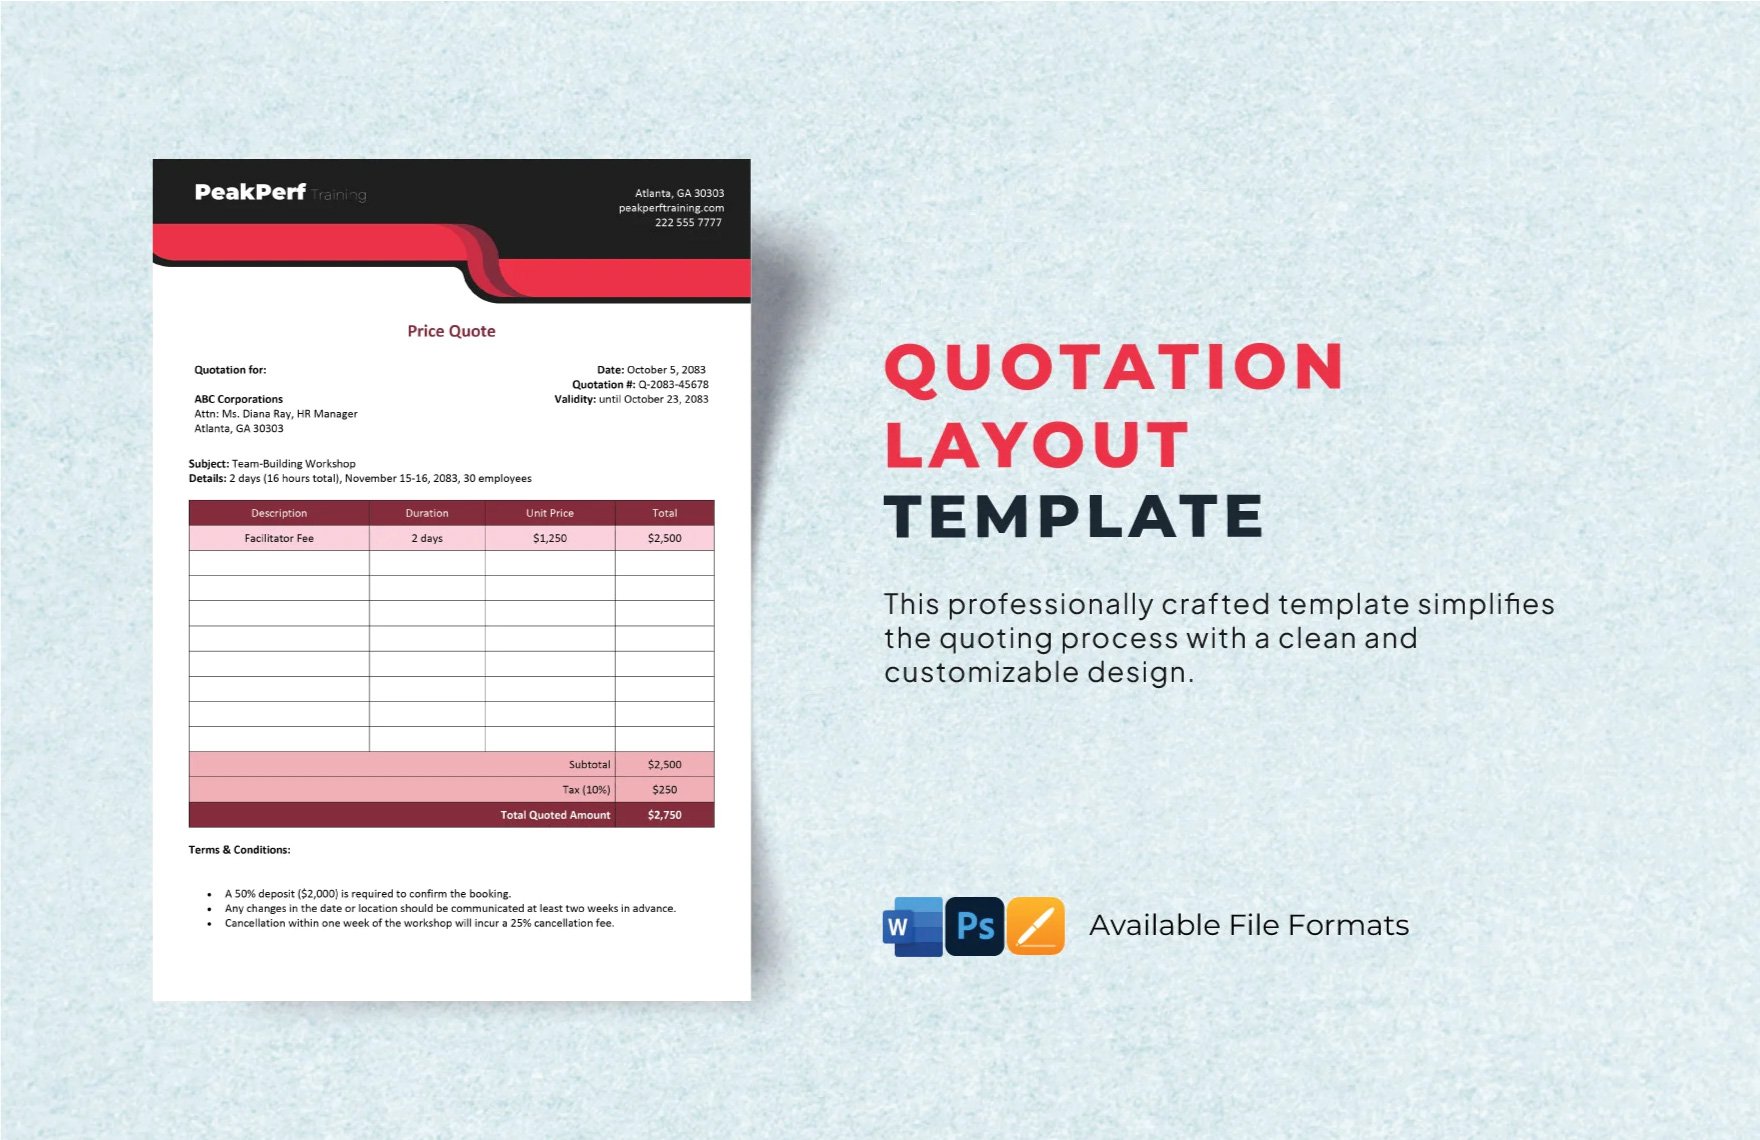 Free Quotation Layout Template in Word, PSD, Apple Pages